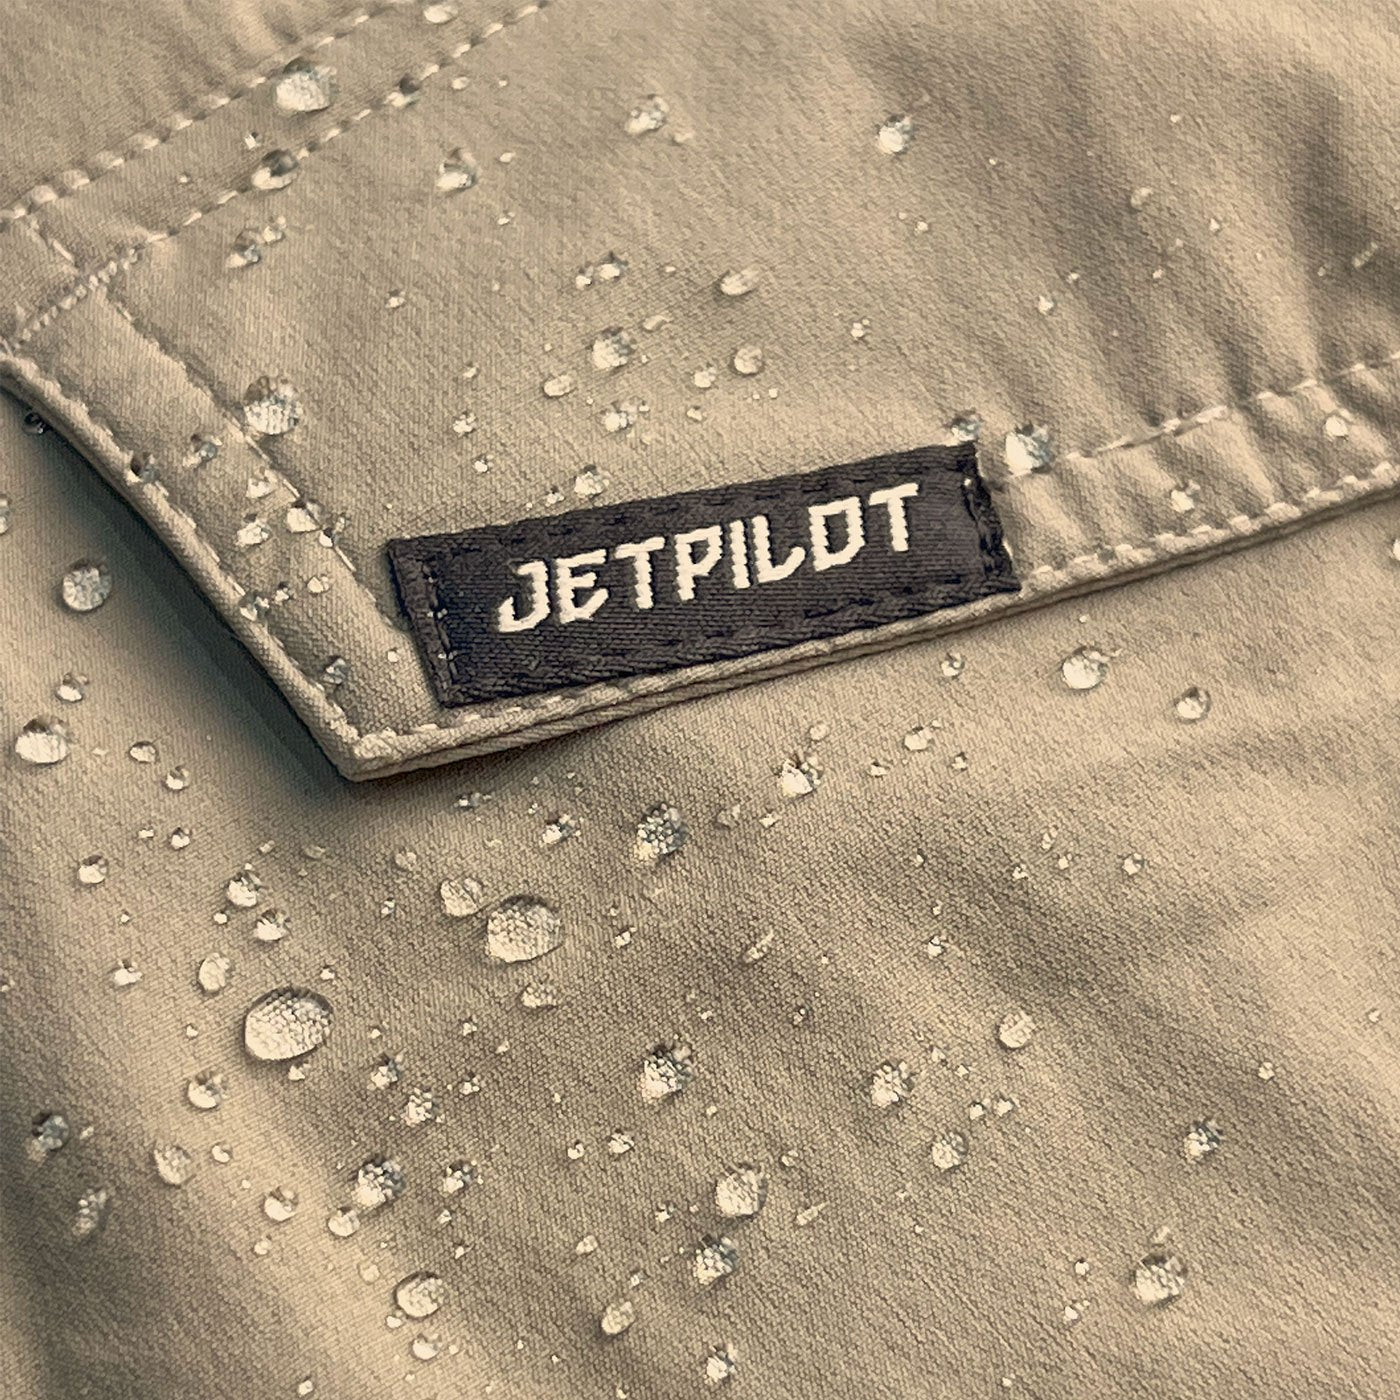 Jetpilot Jet-Lite Fabric tough and resistant for all types of work